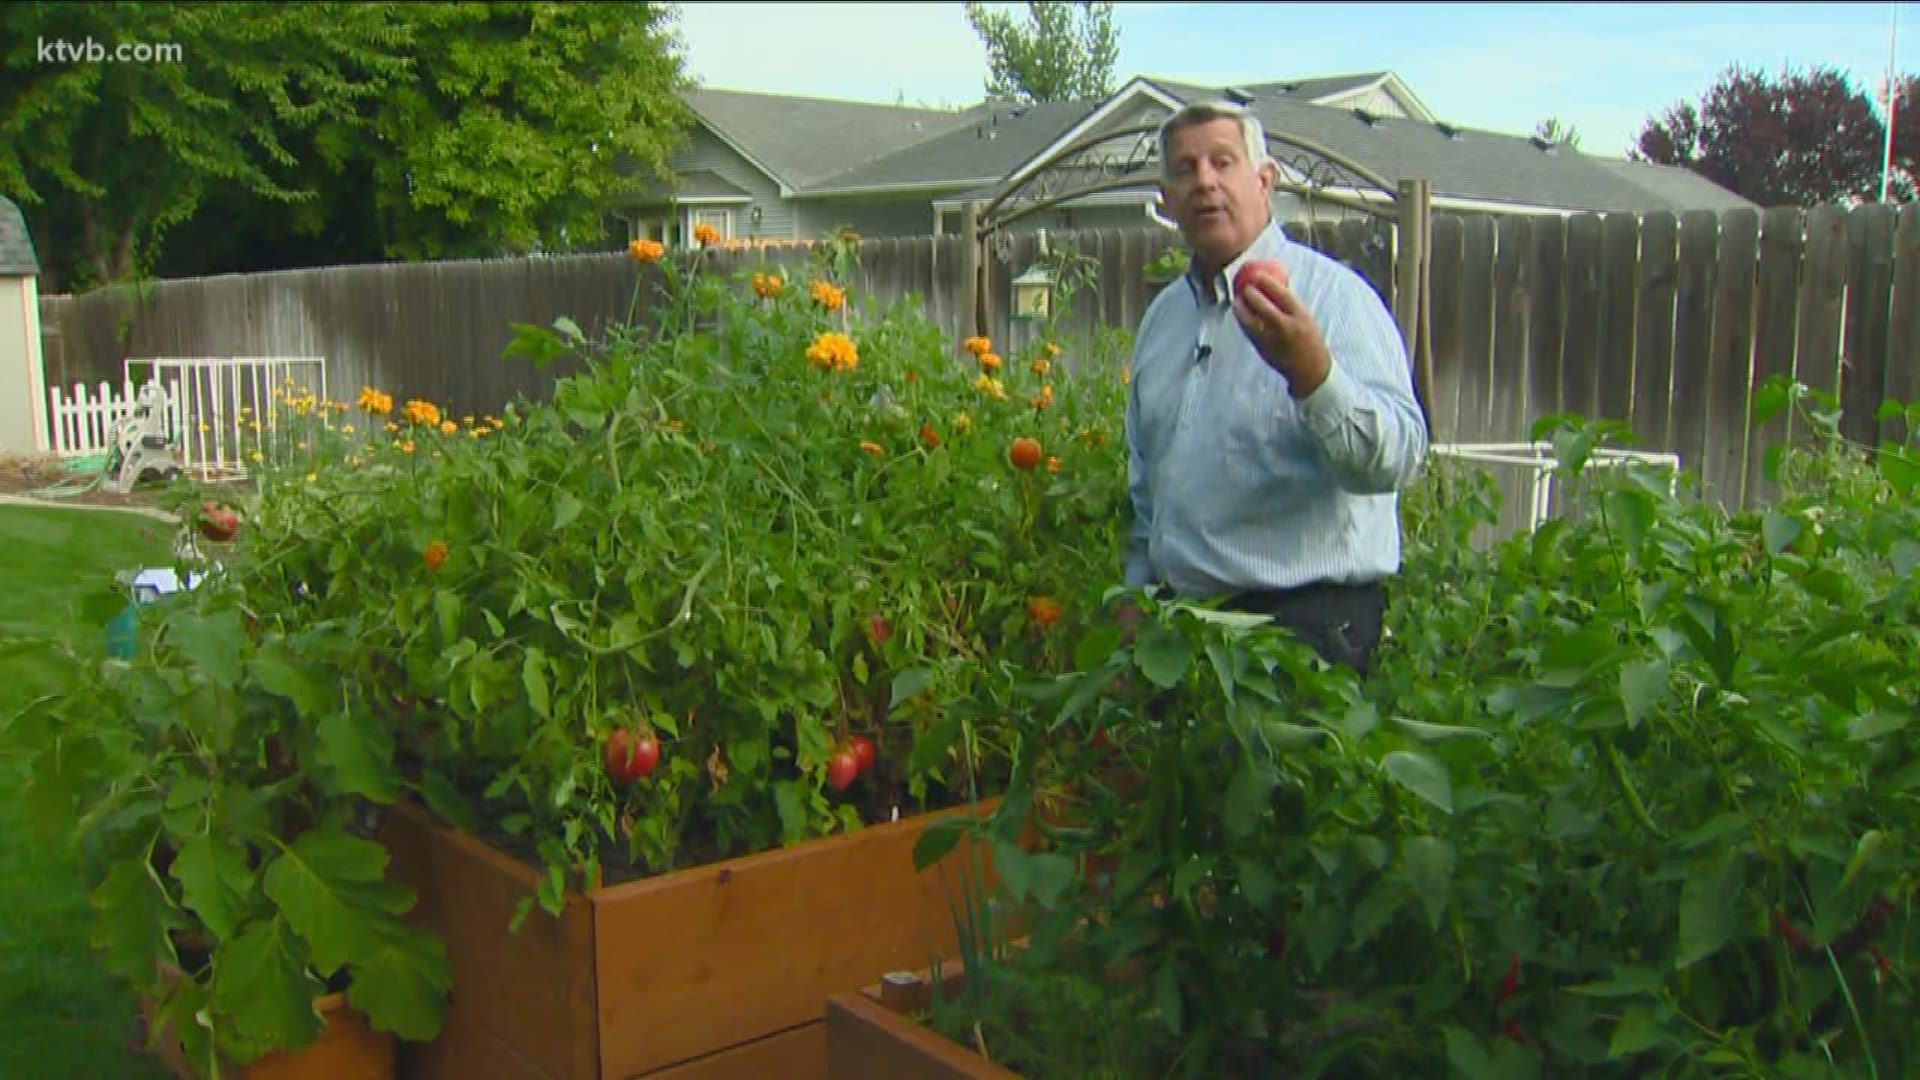 Garden master Jim Duthie grew 19 different kinds of tomatoes in his garden.